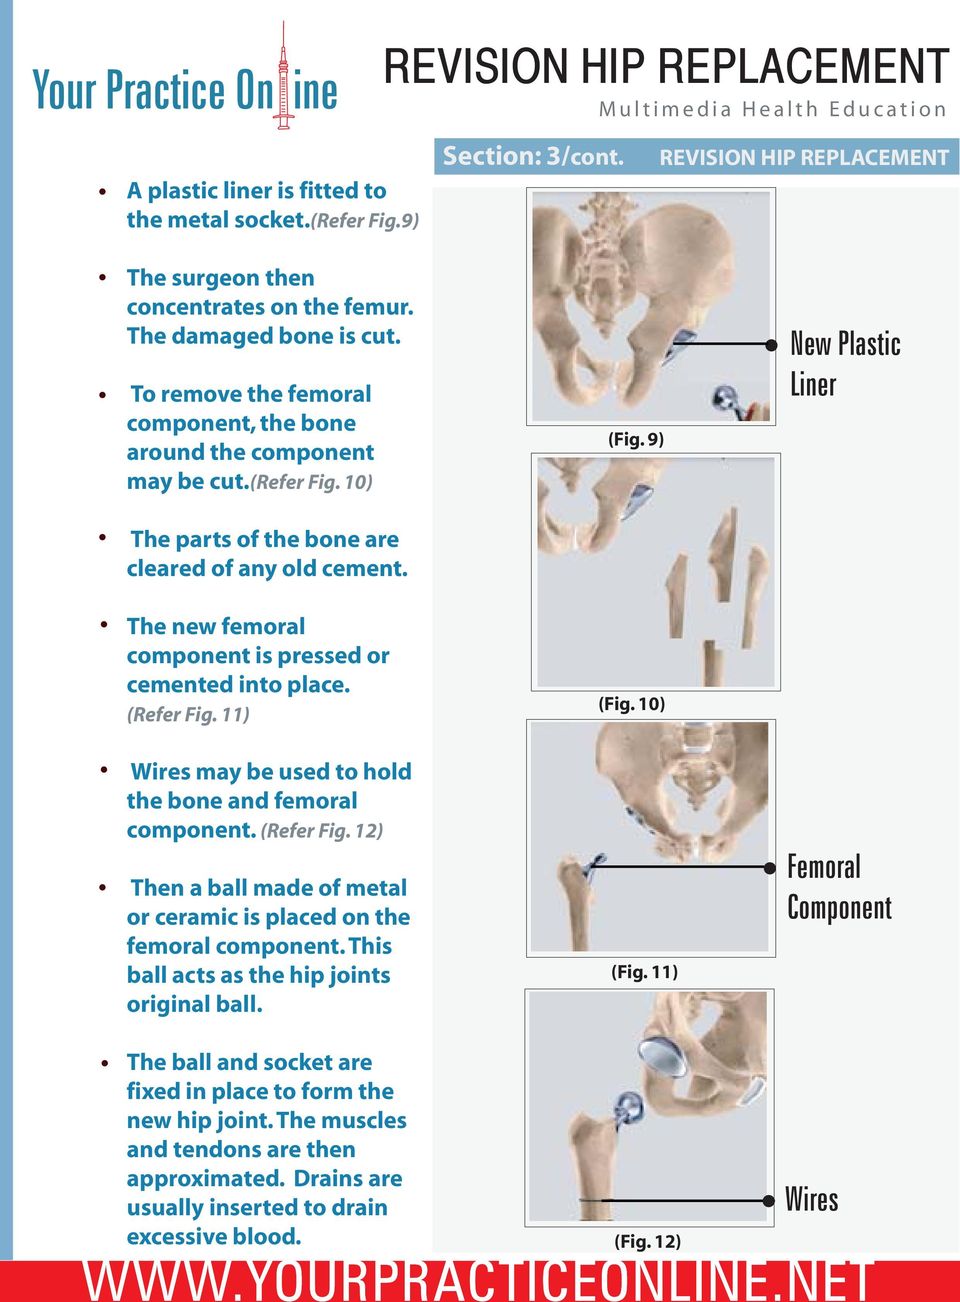 The new femoral component is pressed or cemented into place. (Refer Fig. 11) Wires may be used to hold the bone and femoral component. (Refer Fig. 12) Then a ball made of metal or ceramic is placed on the femoral component.